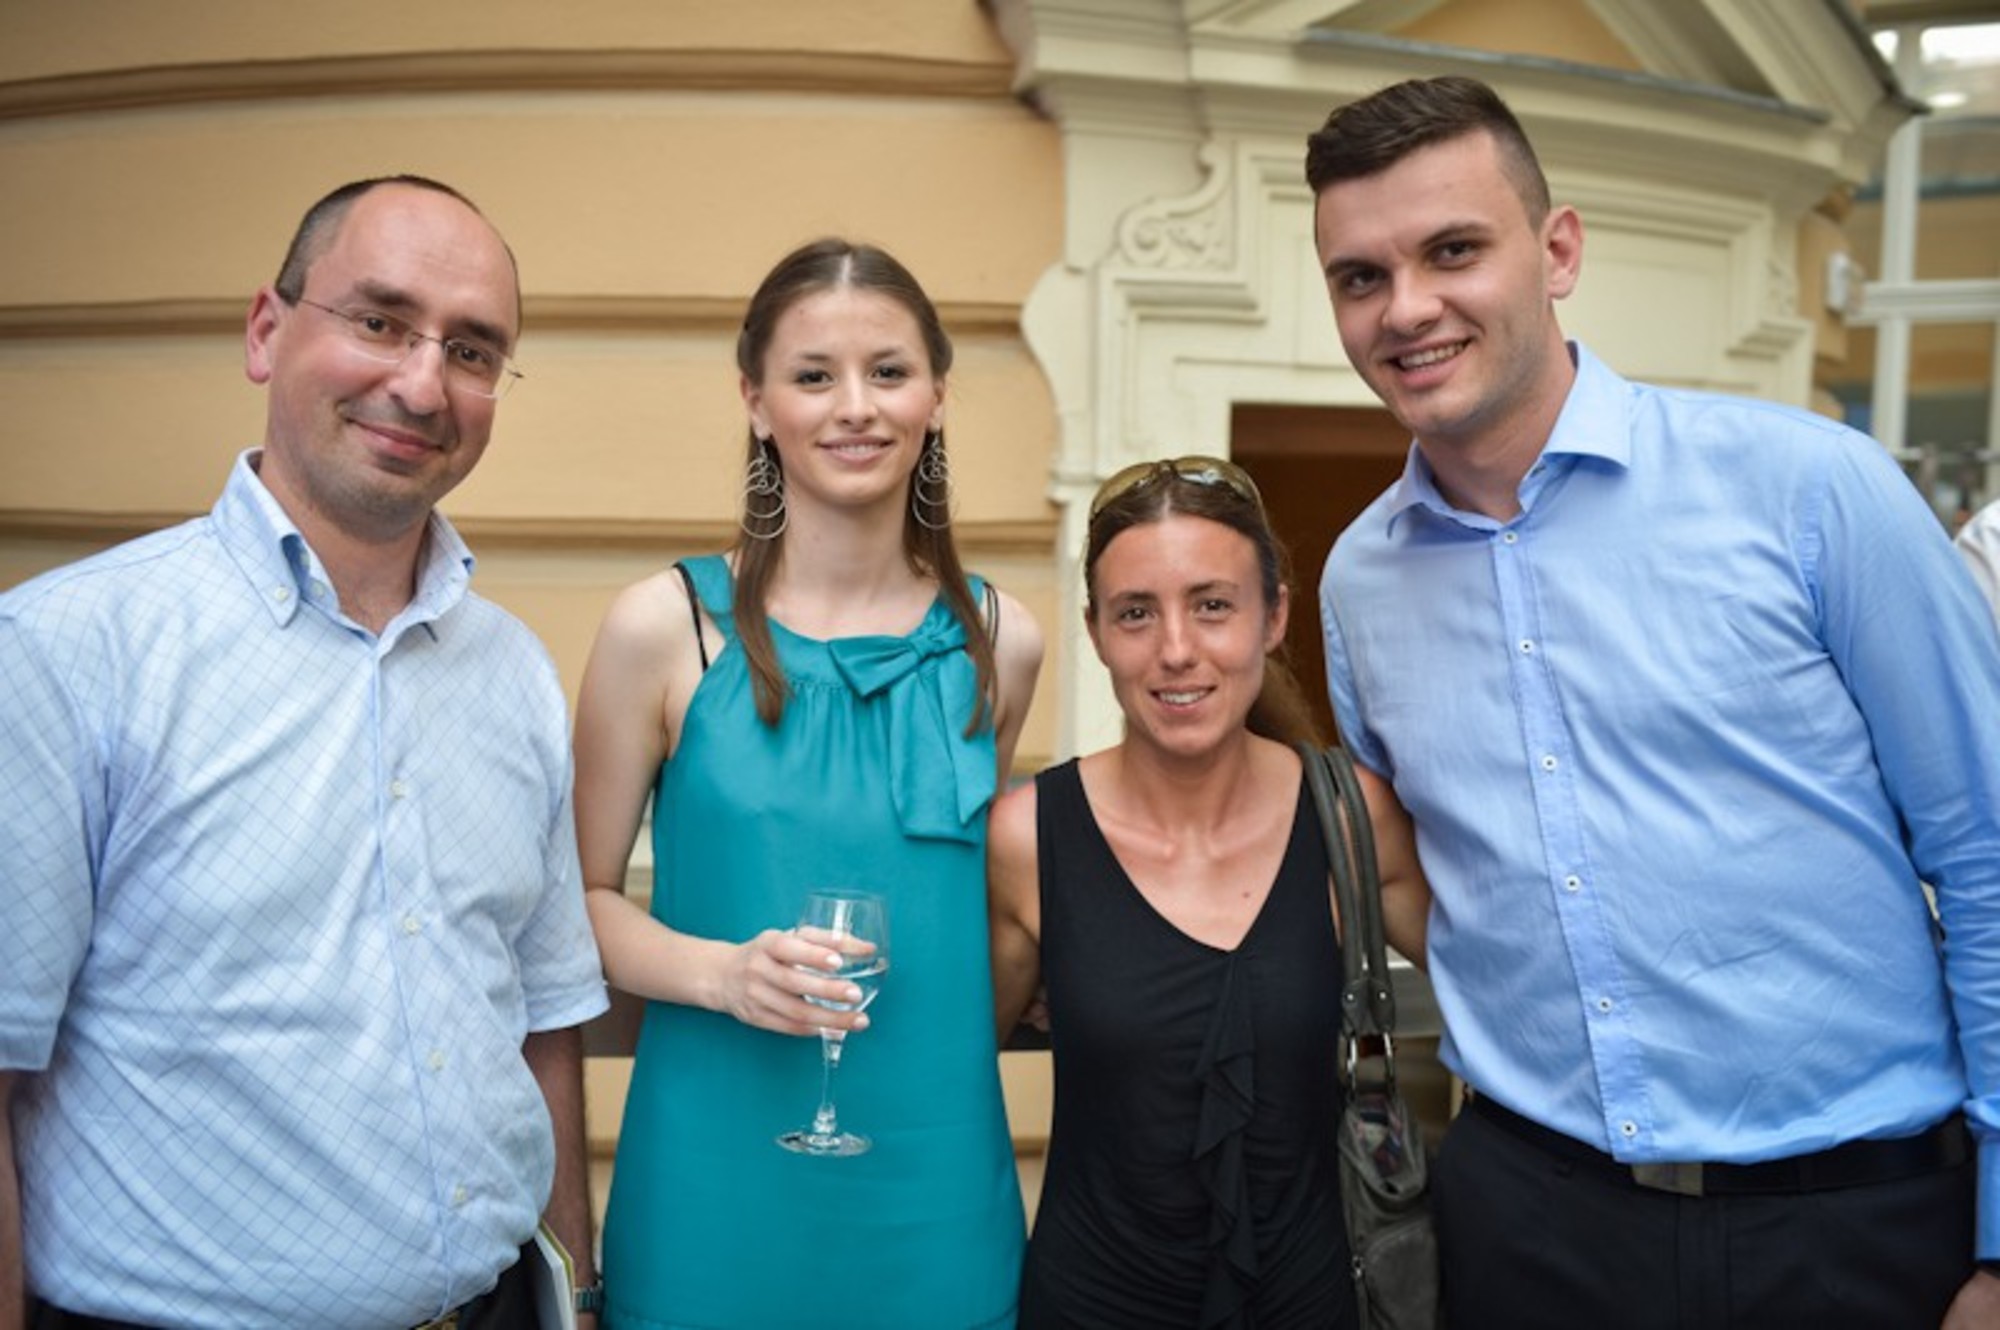 After the Trimo Awards ceremony: Irman Abdić (far right) with his mentor, Assist. Prof. Janez Žibert, PhD, and Dean of UP FAMNIT, Assist. Prof. Klavdija Kutnar, PhD (second right).